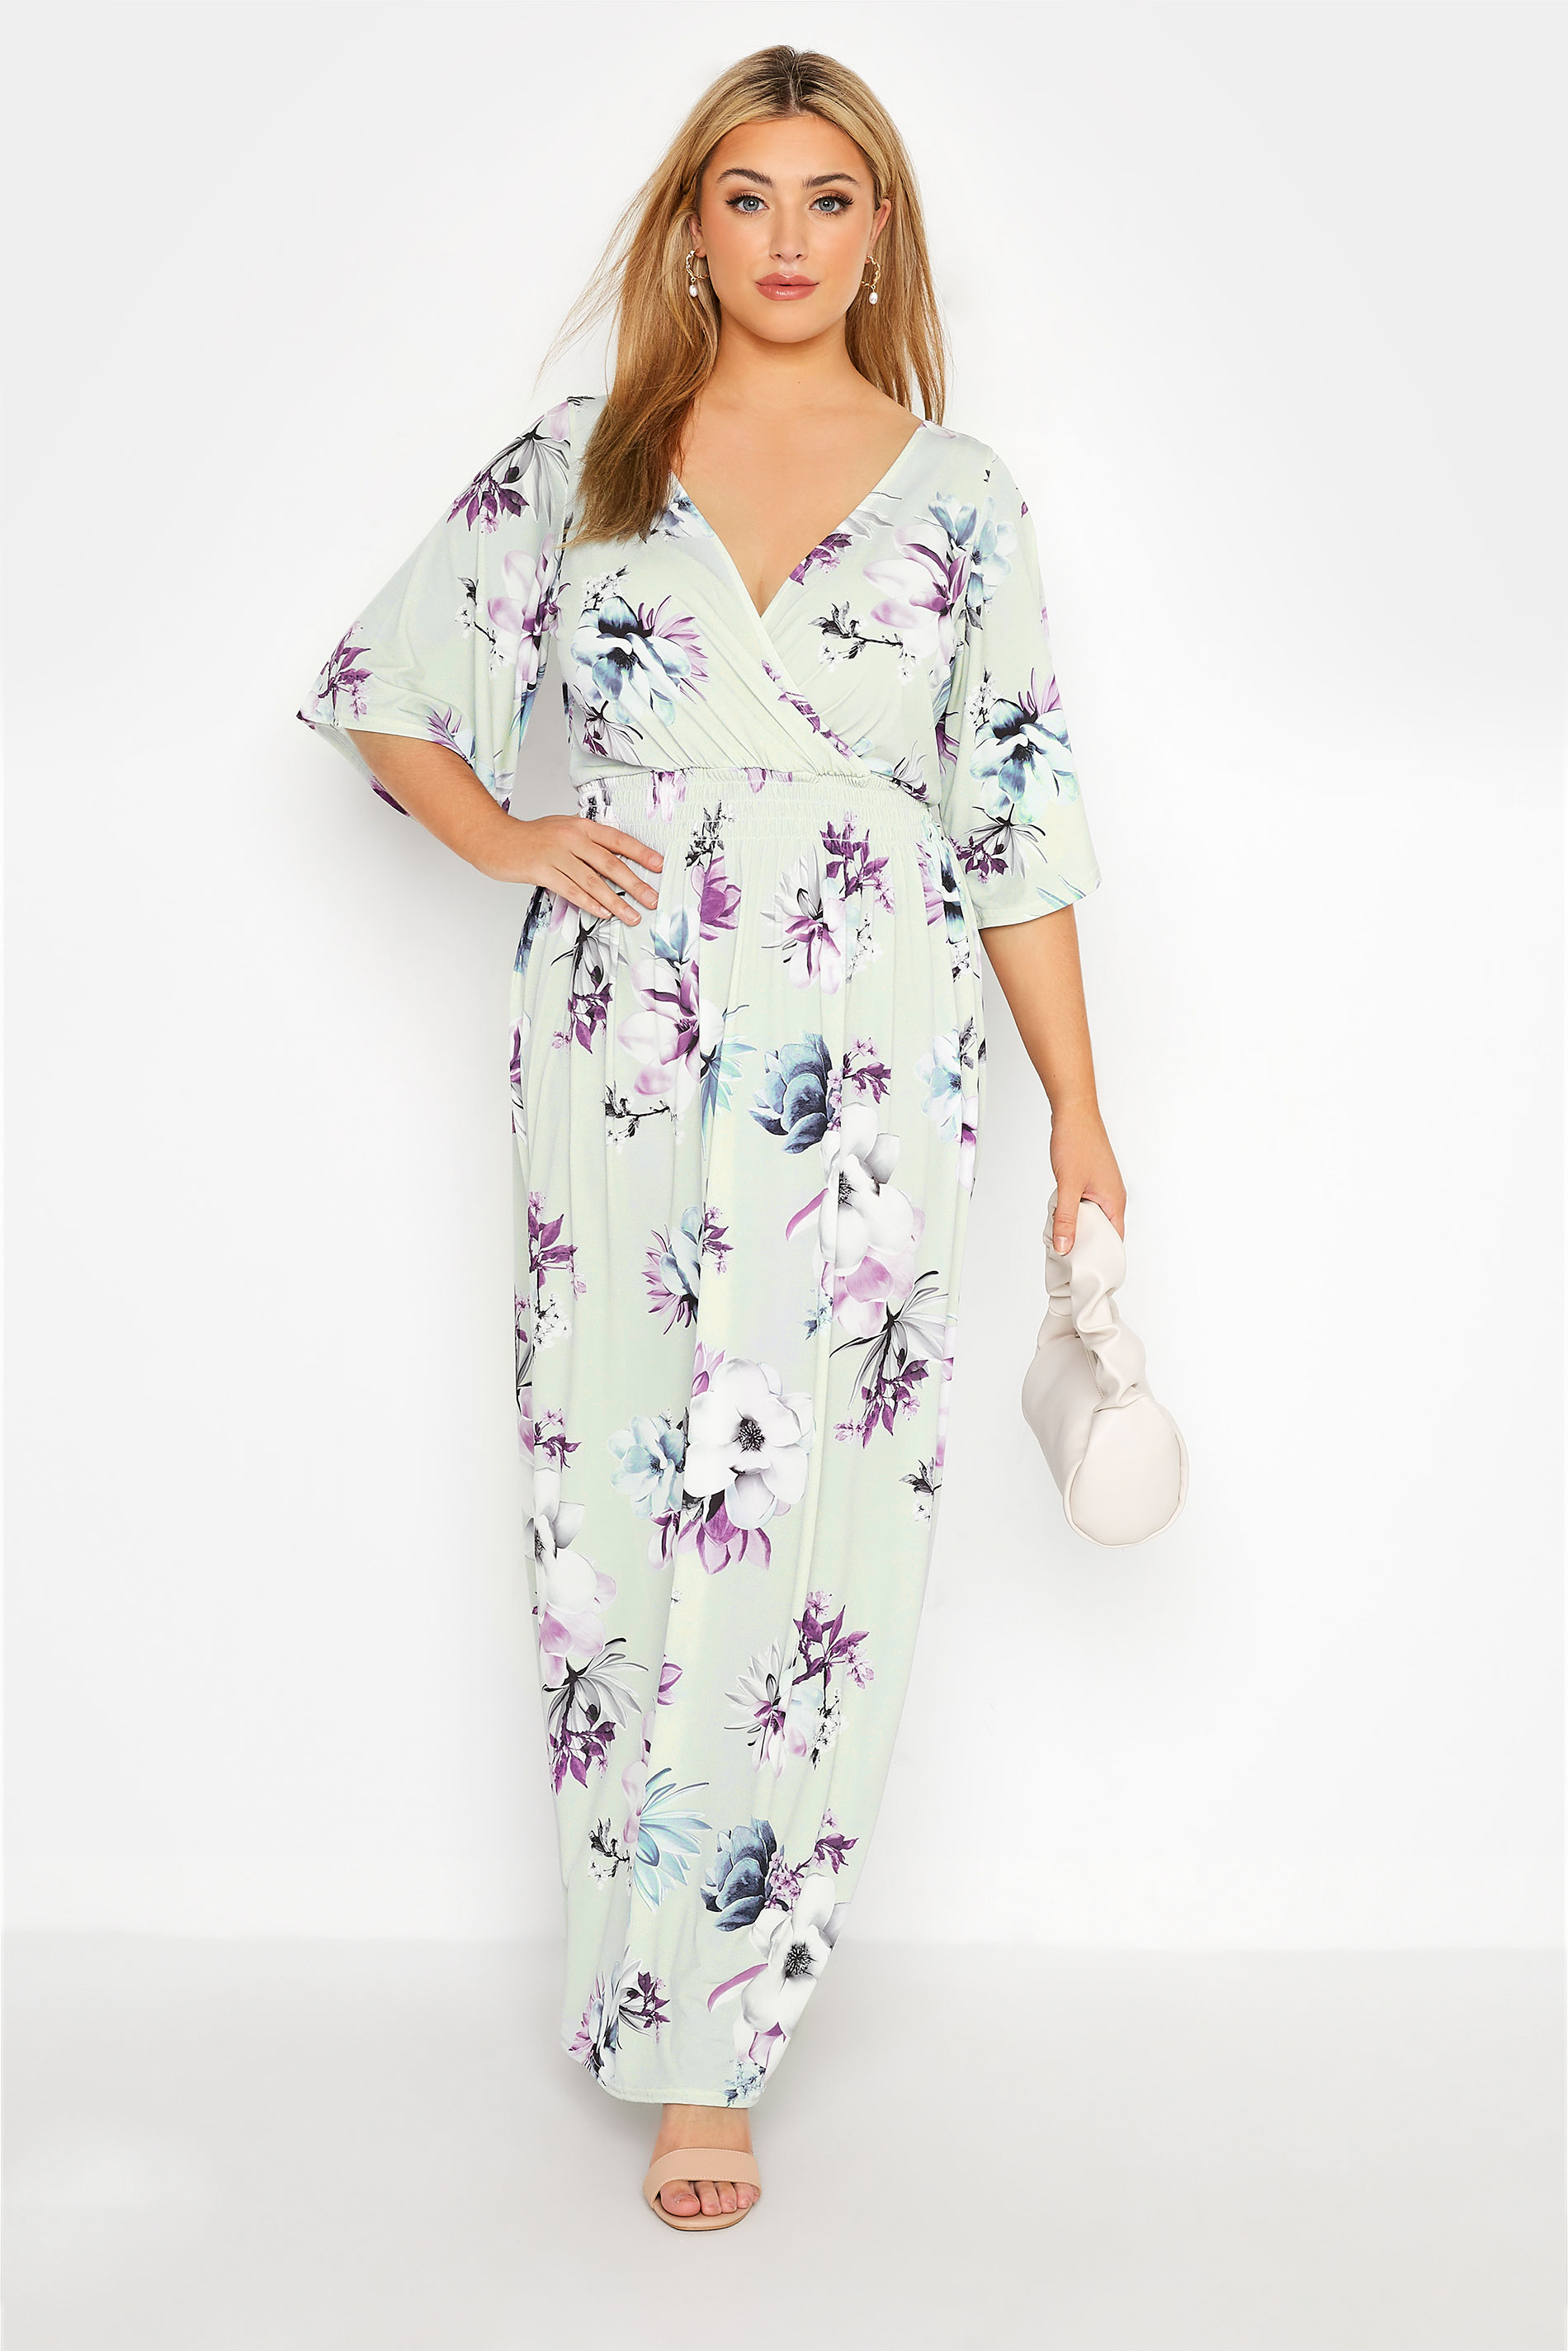 Robes Grande Taille Grande taille  Robes Longues | YOURS LONDON - Robe Cache-Coeur Floral Verte Pastel Maxi - VN68556